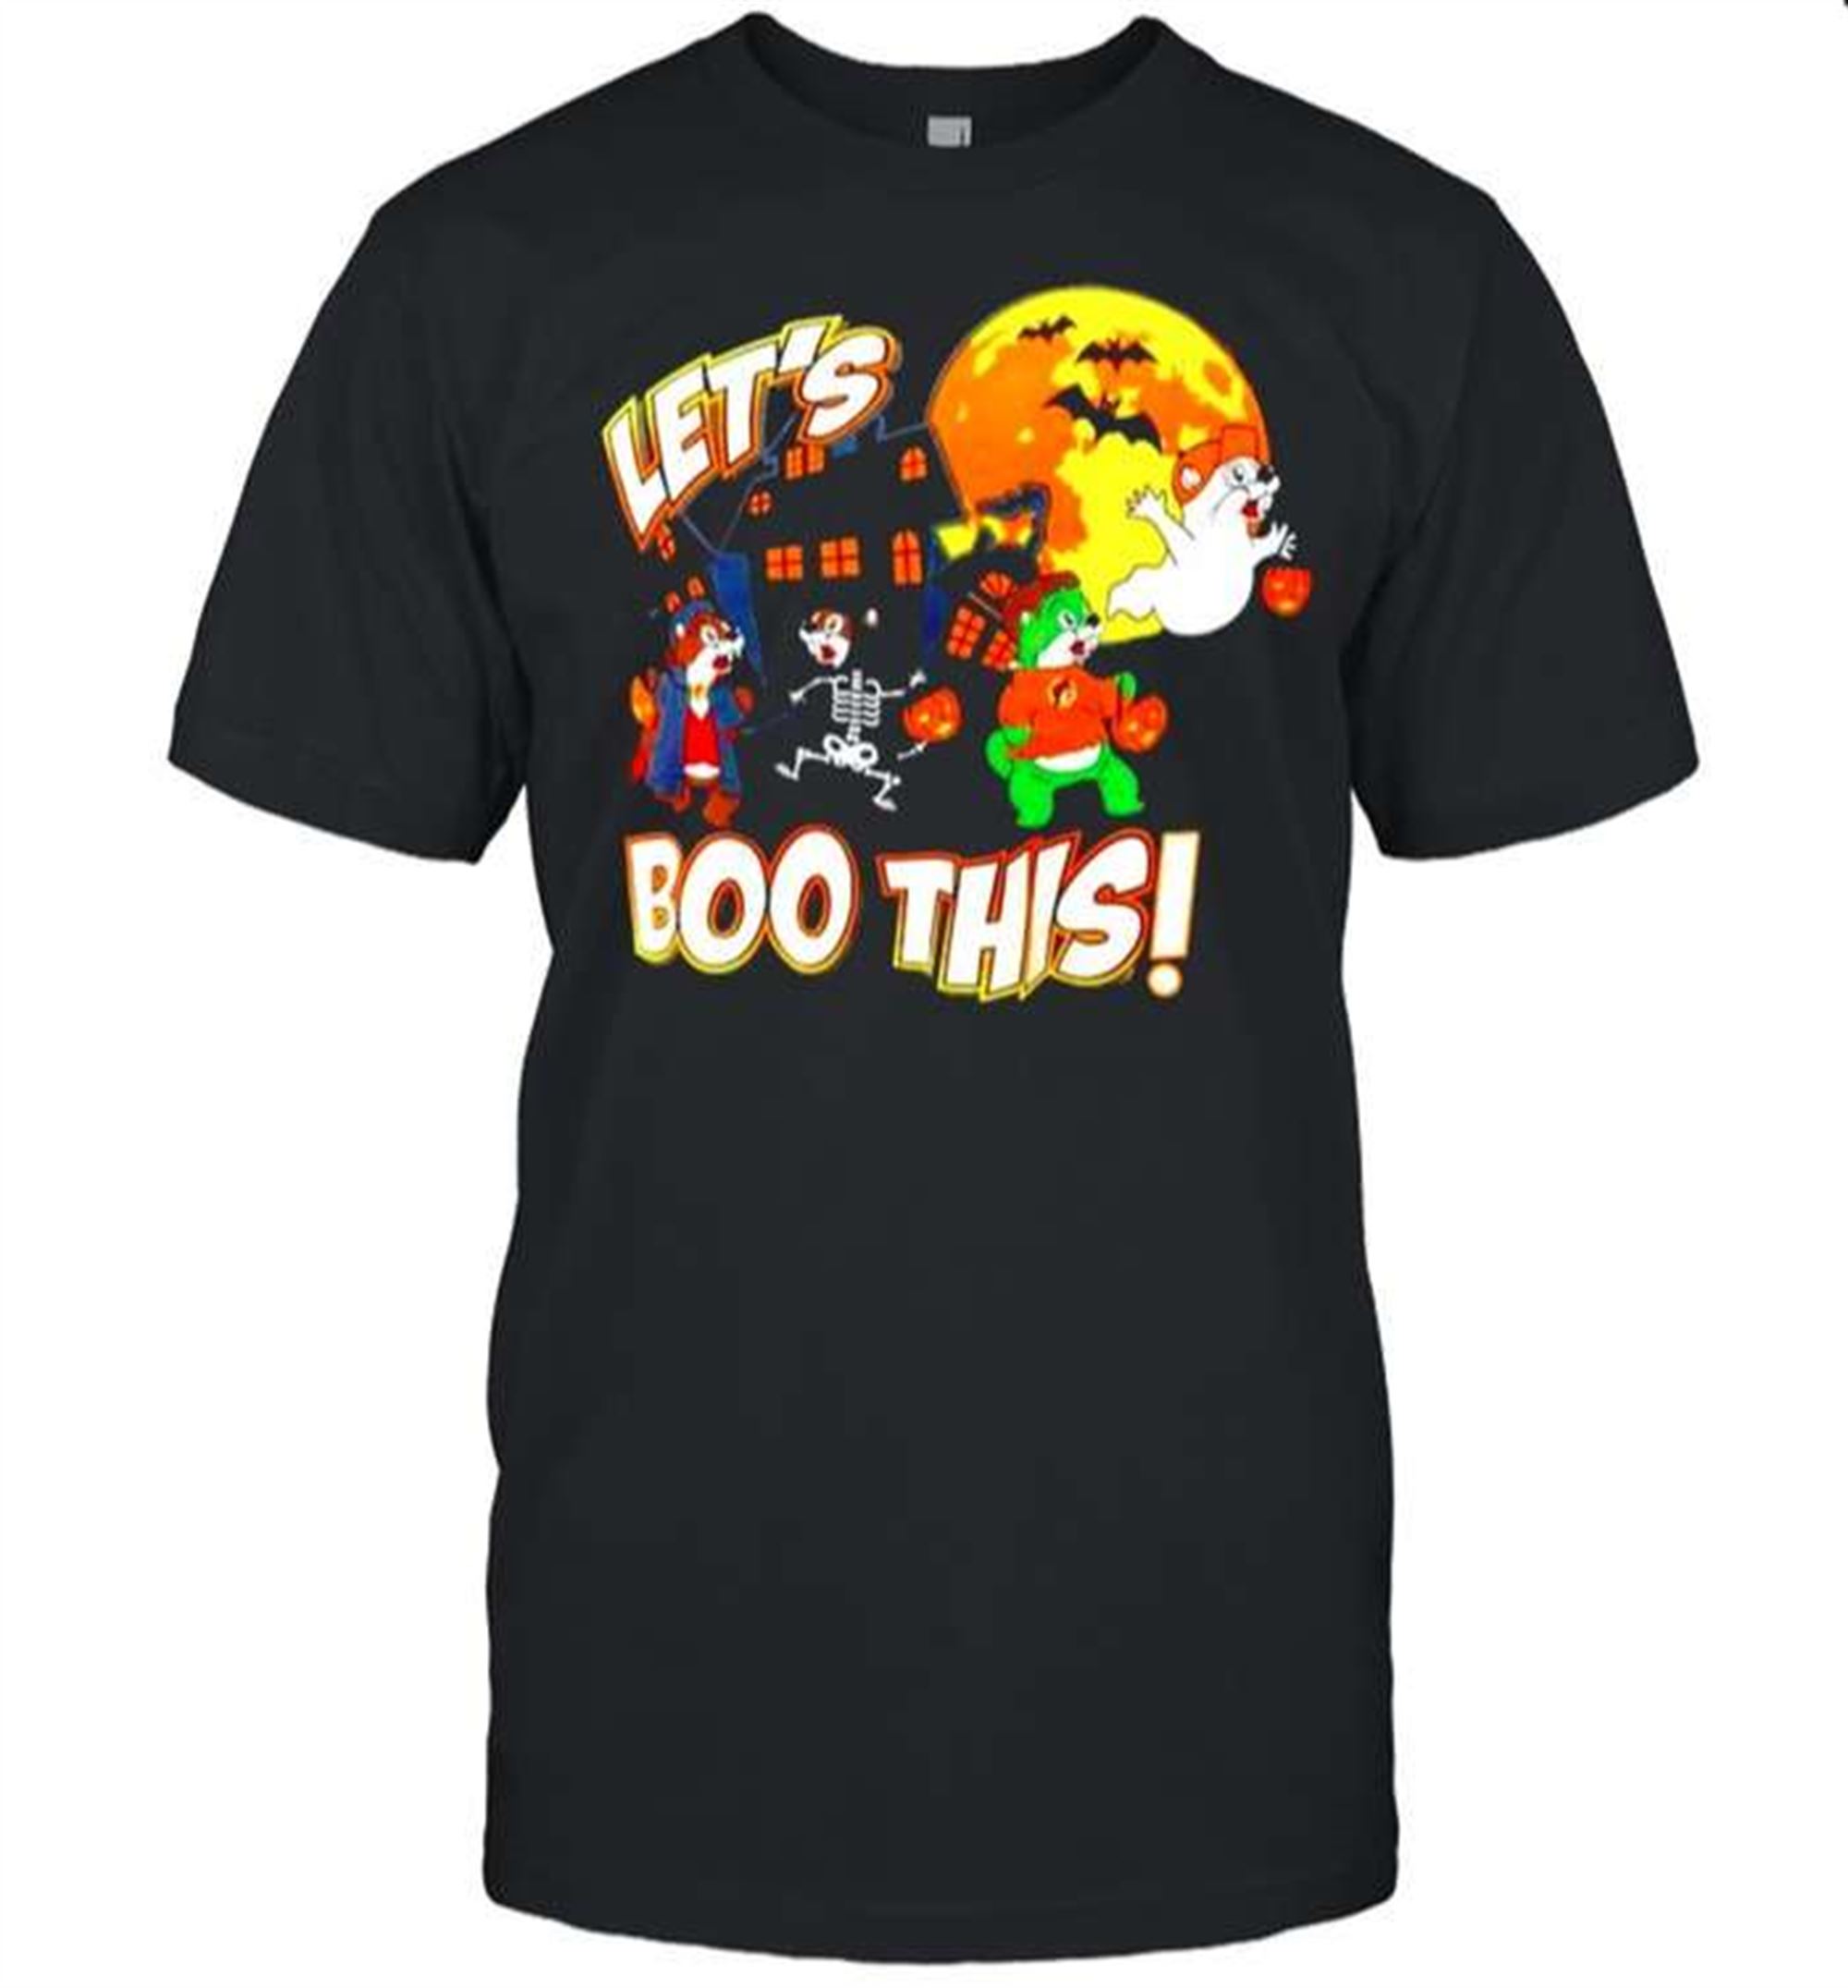 Halloween Lets Boo This T-shirt Full Size Up To 5xl